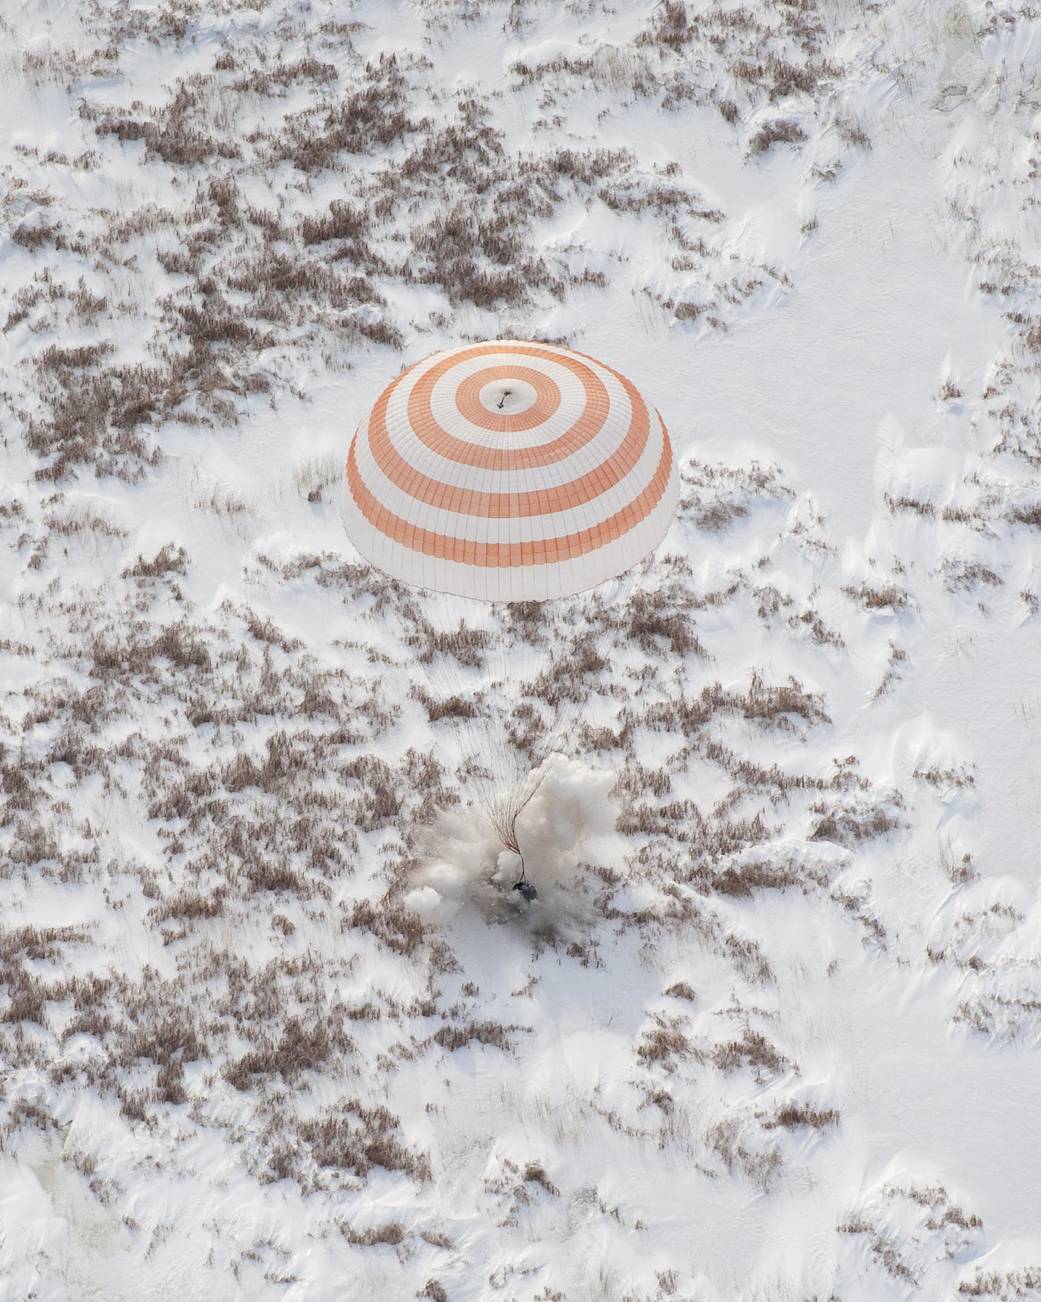 Expedition 22 Crew Lands